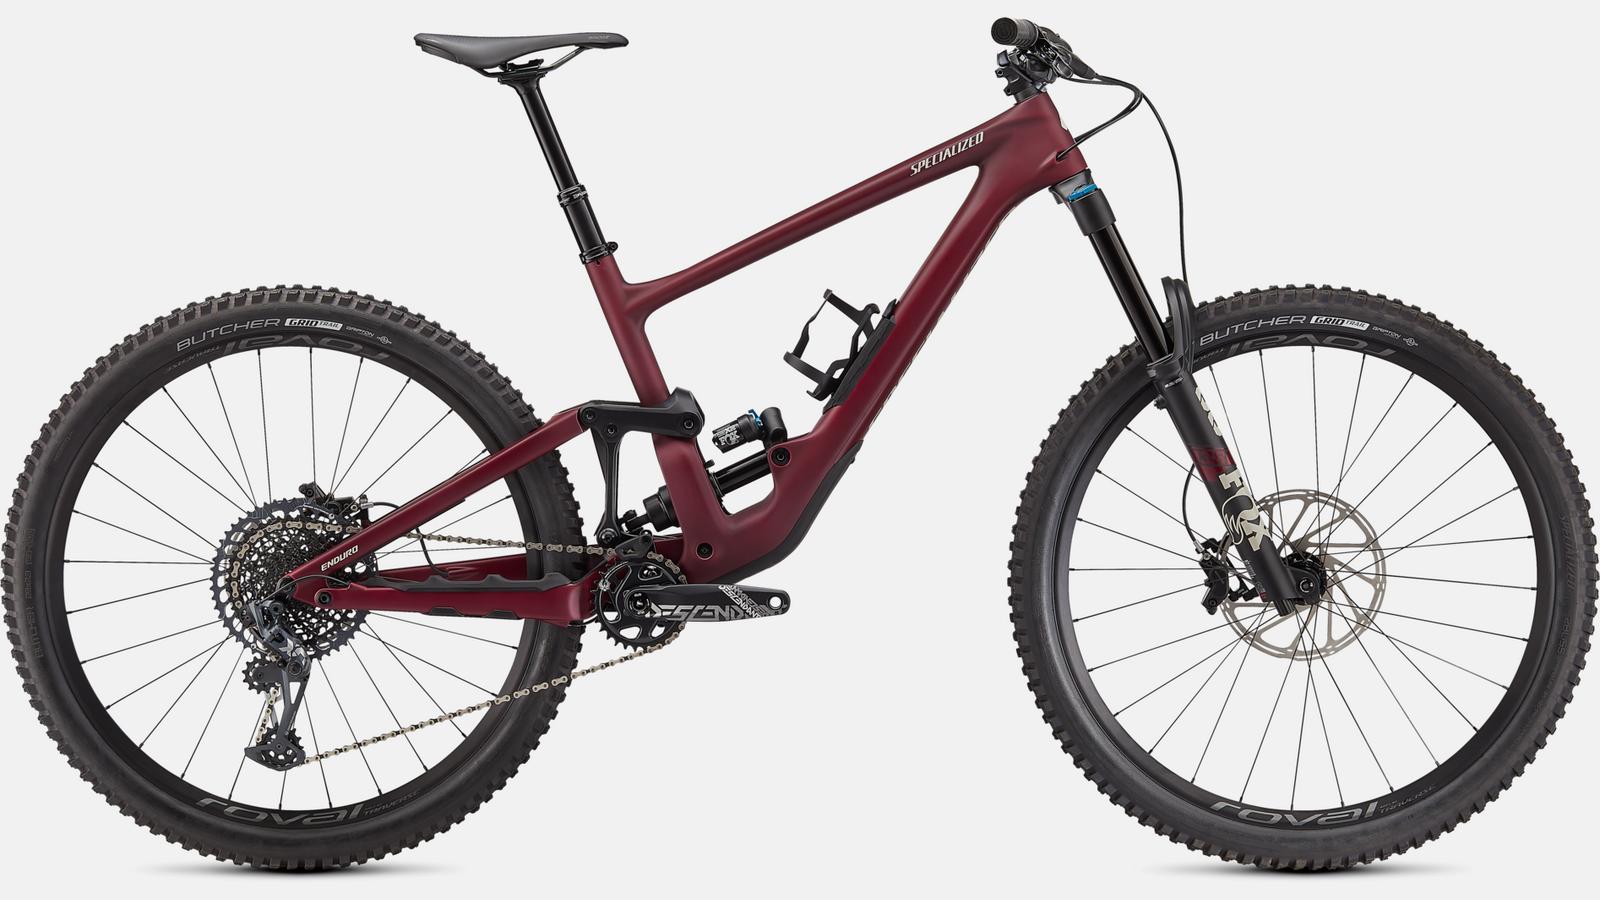 Paint for 2021 Specialized Enduro Expert - Satin Maroon